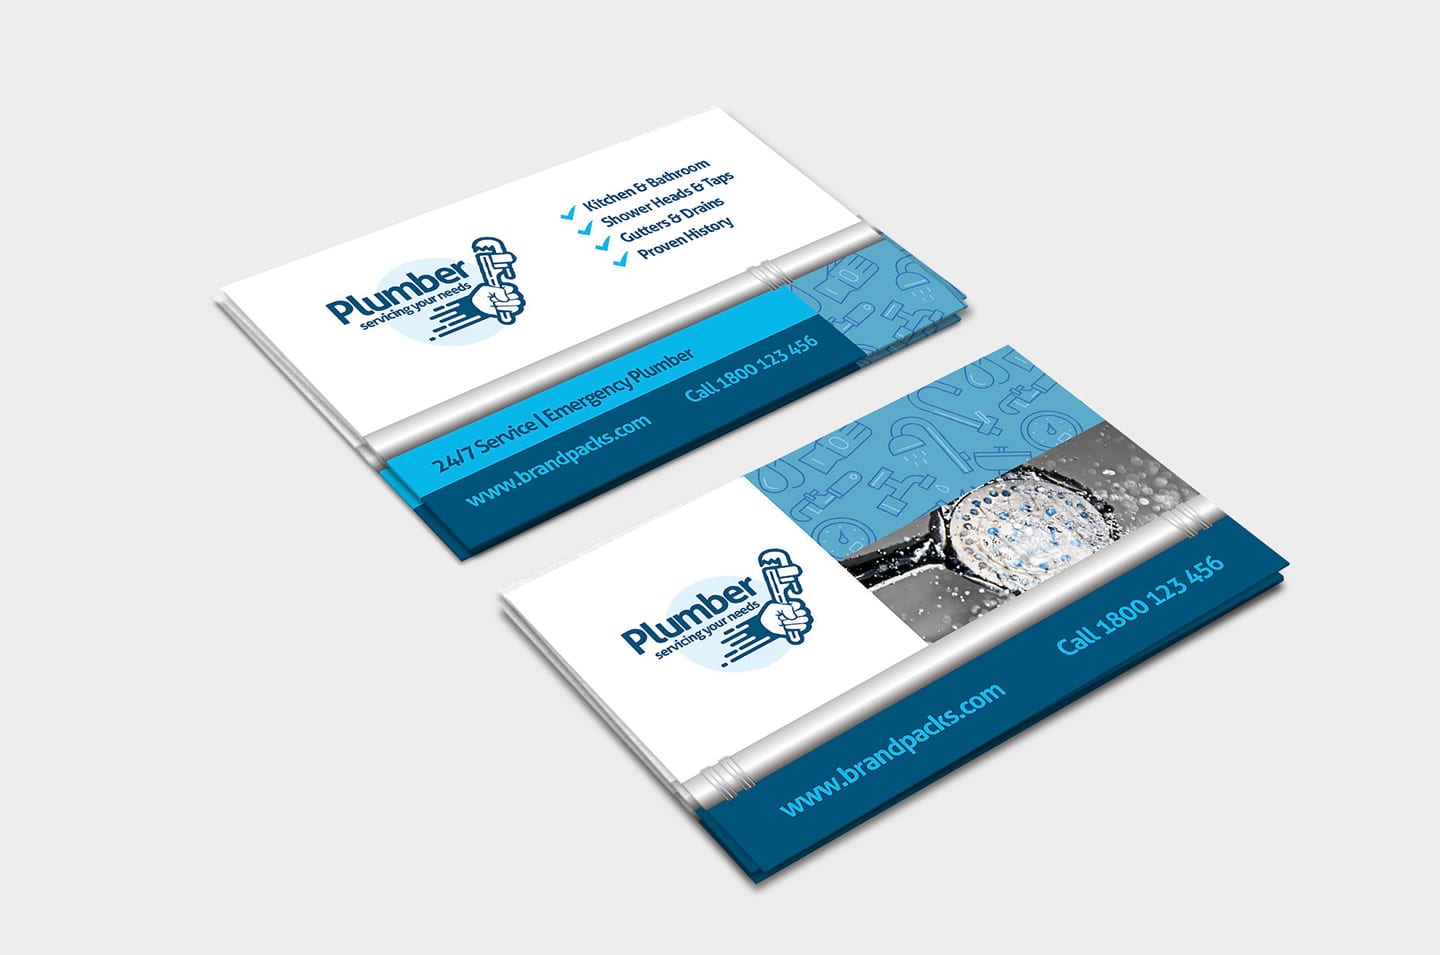 plumber business cards 1